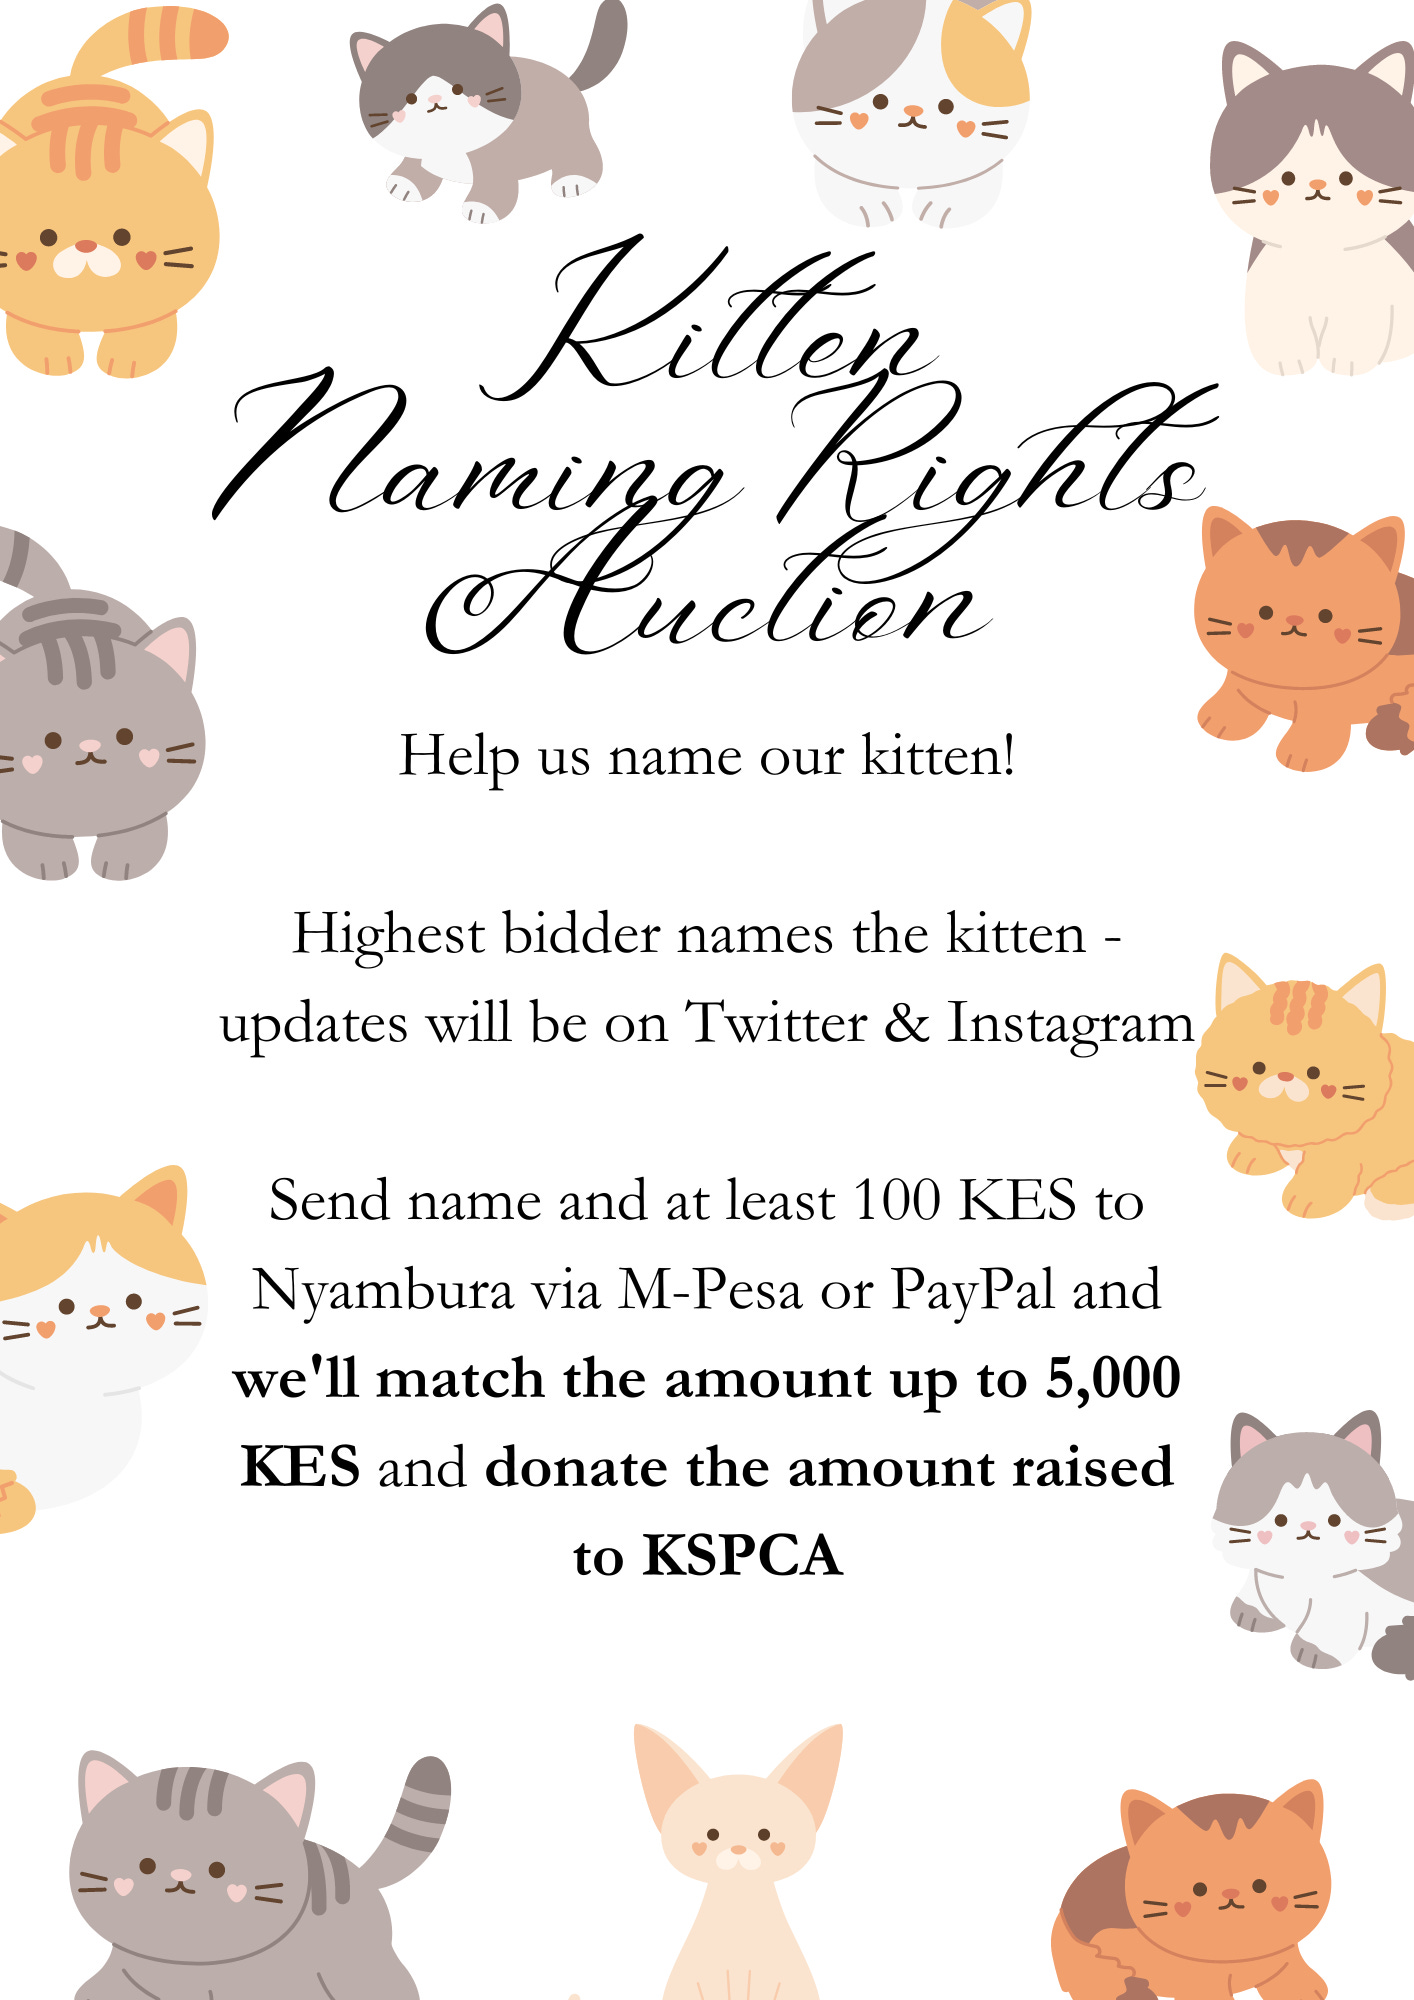 Poster title: Kitten Naming Rights Auction. Poster text: Help us name our kitten!  Highest bidder names the kitten - updates will be on Twitter & Instagram  Send name and at least 100 KES to Nyambura via M-Pesa or PayPal and we'll match the amount up to 5,000 KES and donate the amount raised to KSPCA